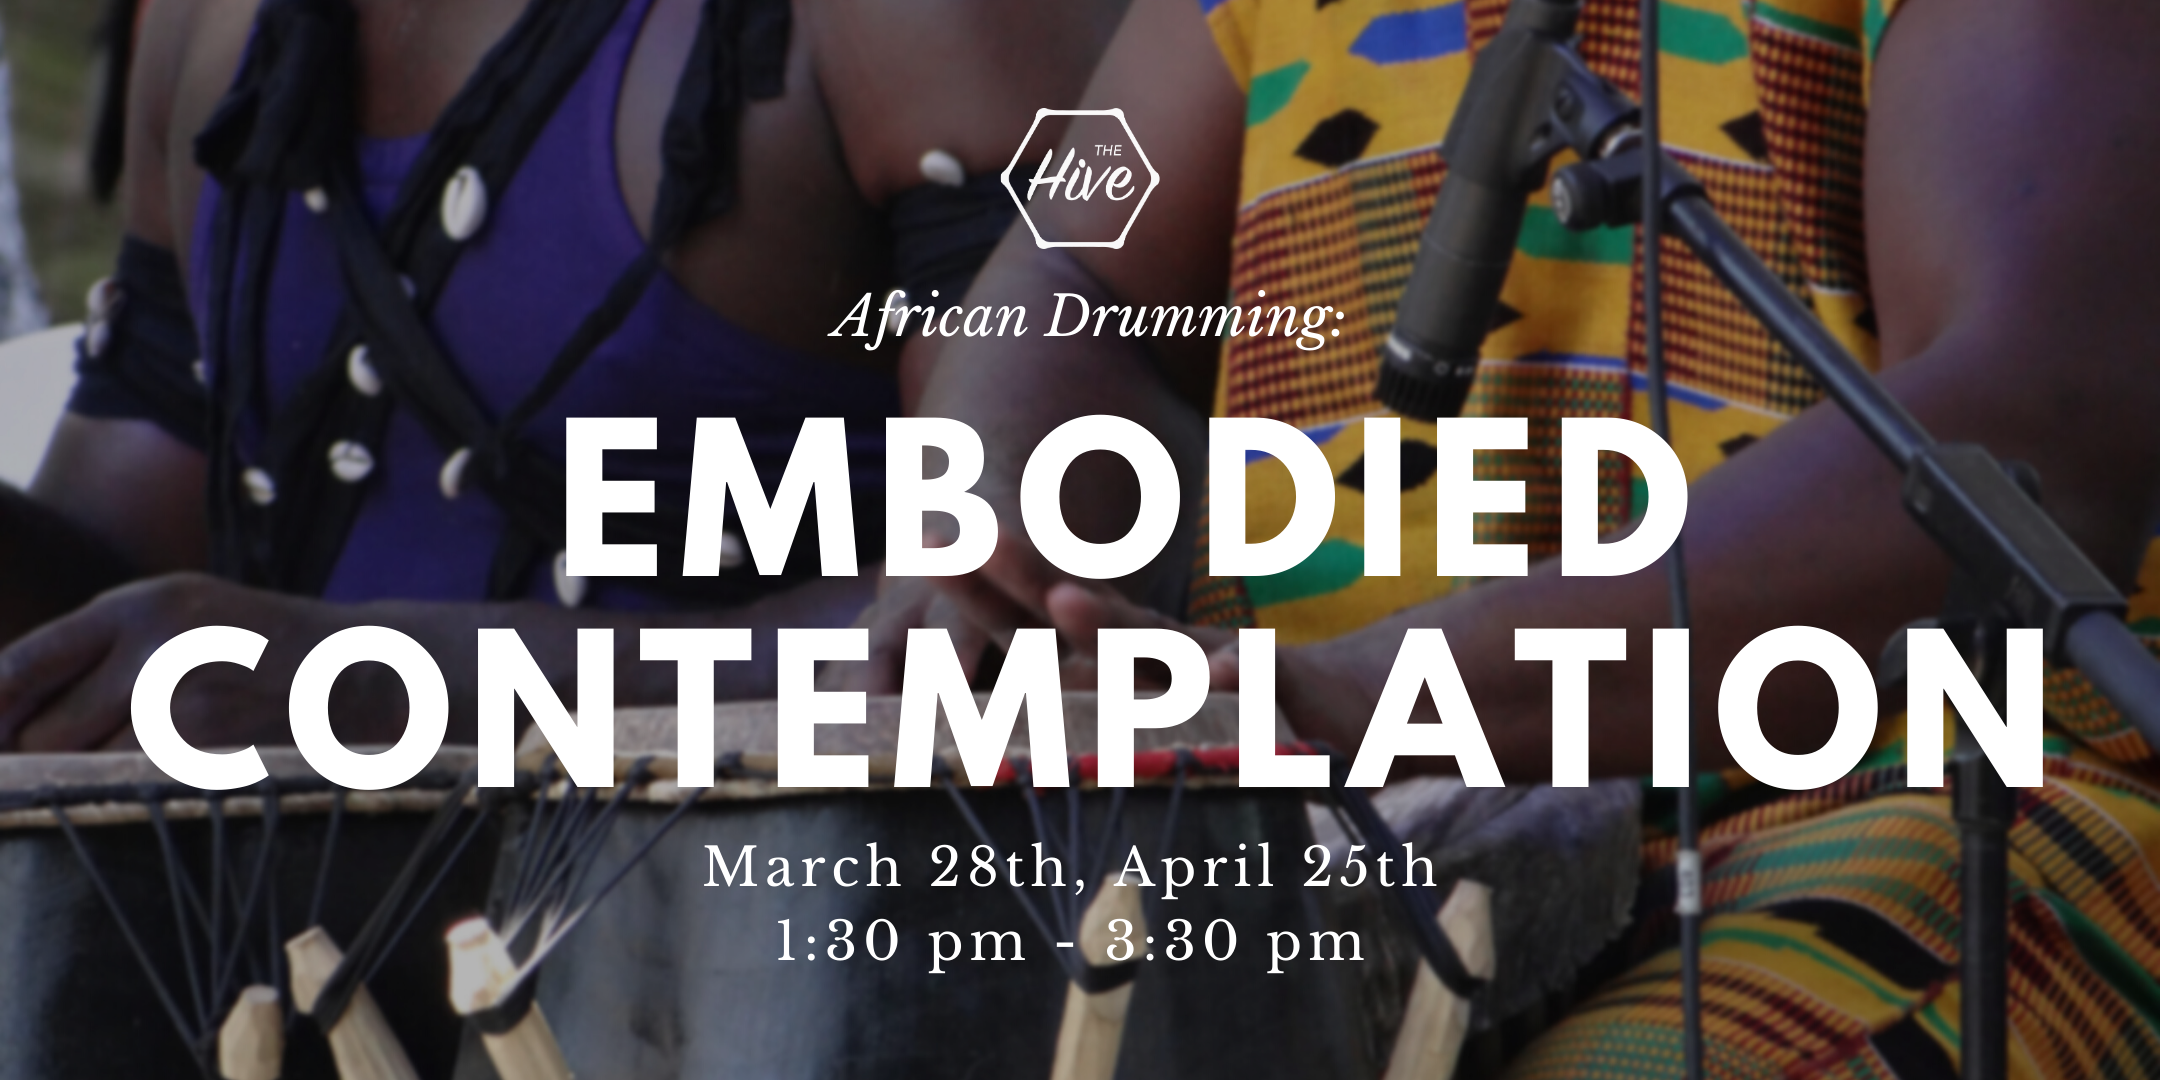 African Drumming: Embodied Contemplation